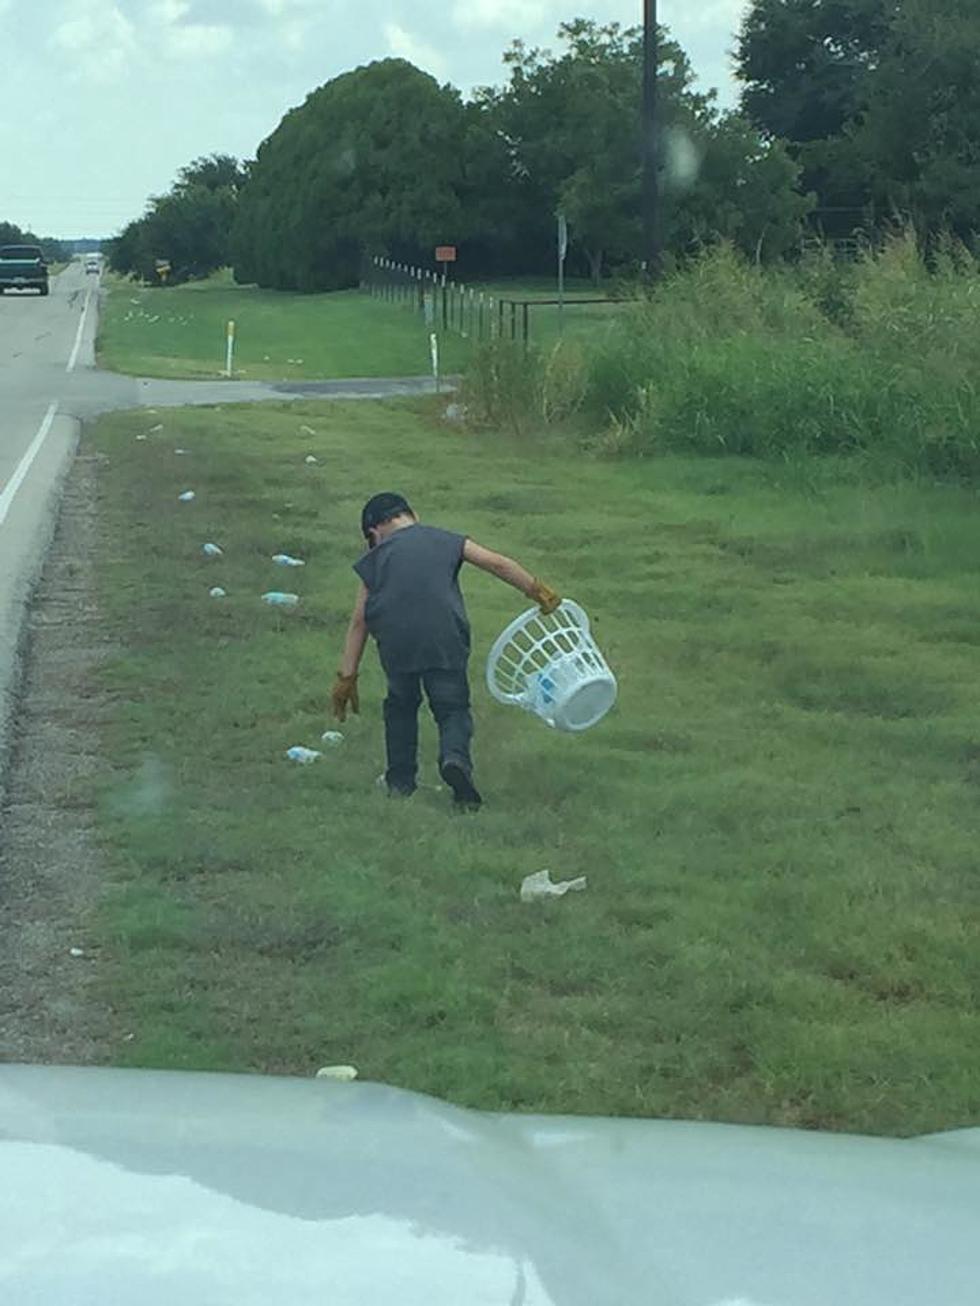 Hotter’N Hell Organizers Respond to Viral Photos of Trash Left on Side of Road